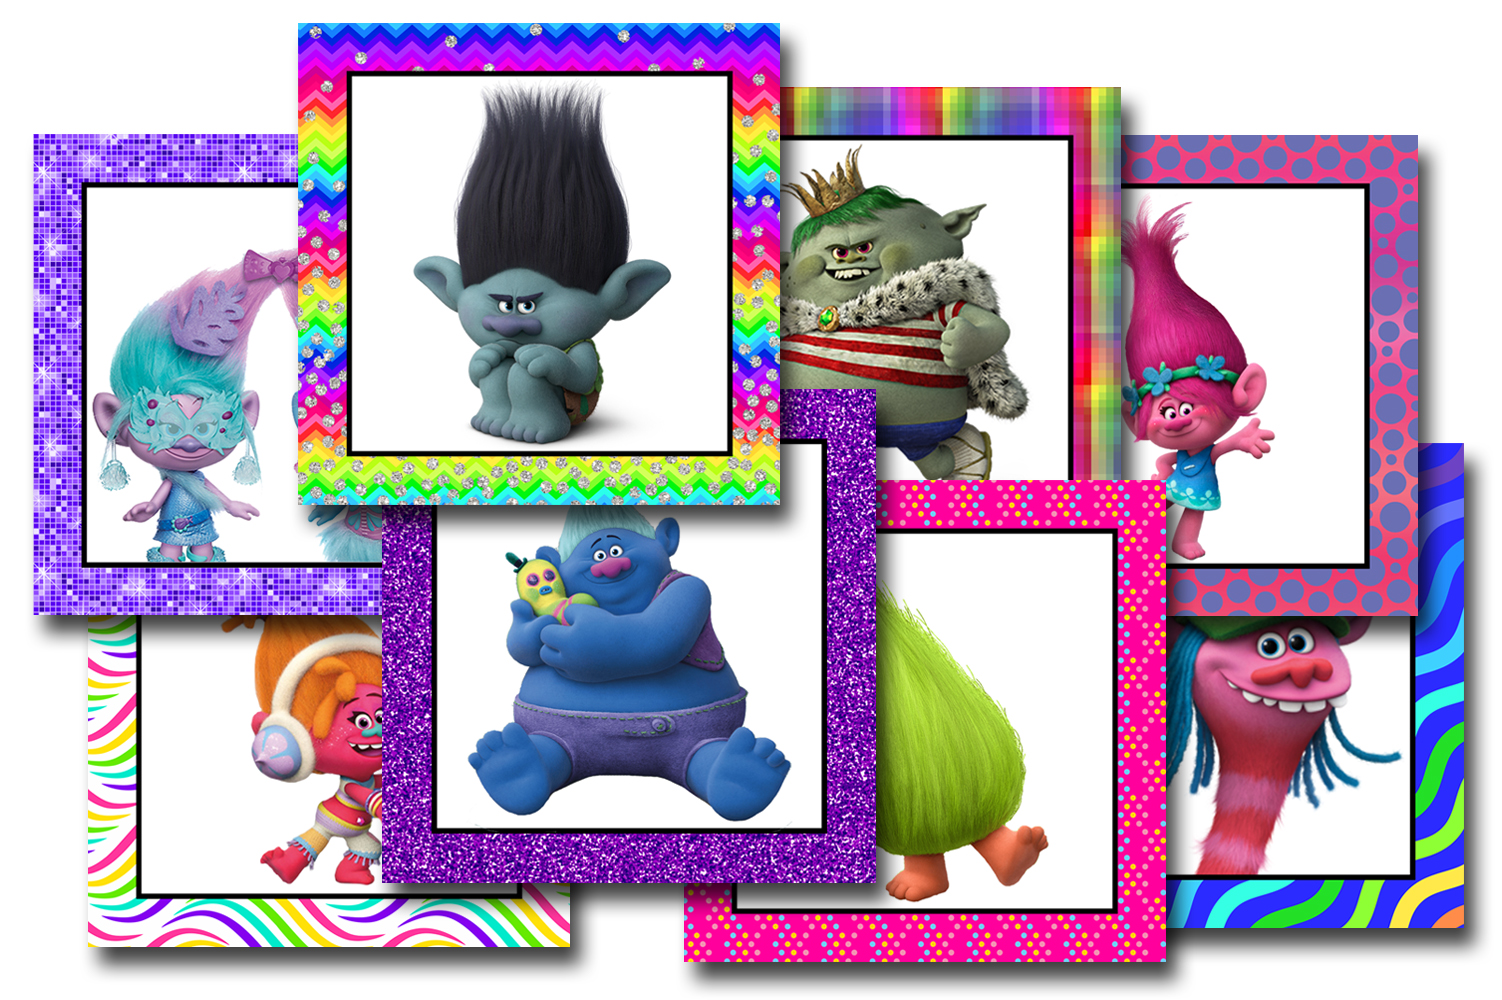 Free: Trolls mobile game gift code - Video Game Prepaid Cards